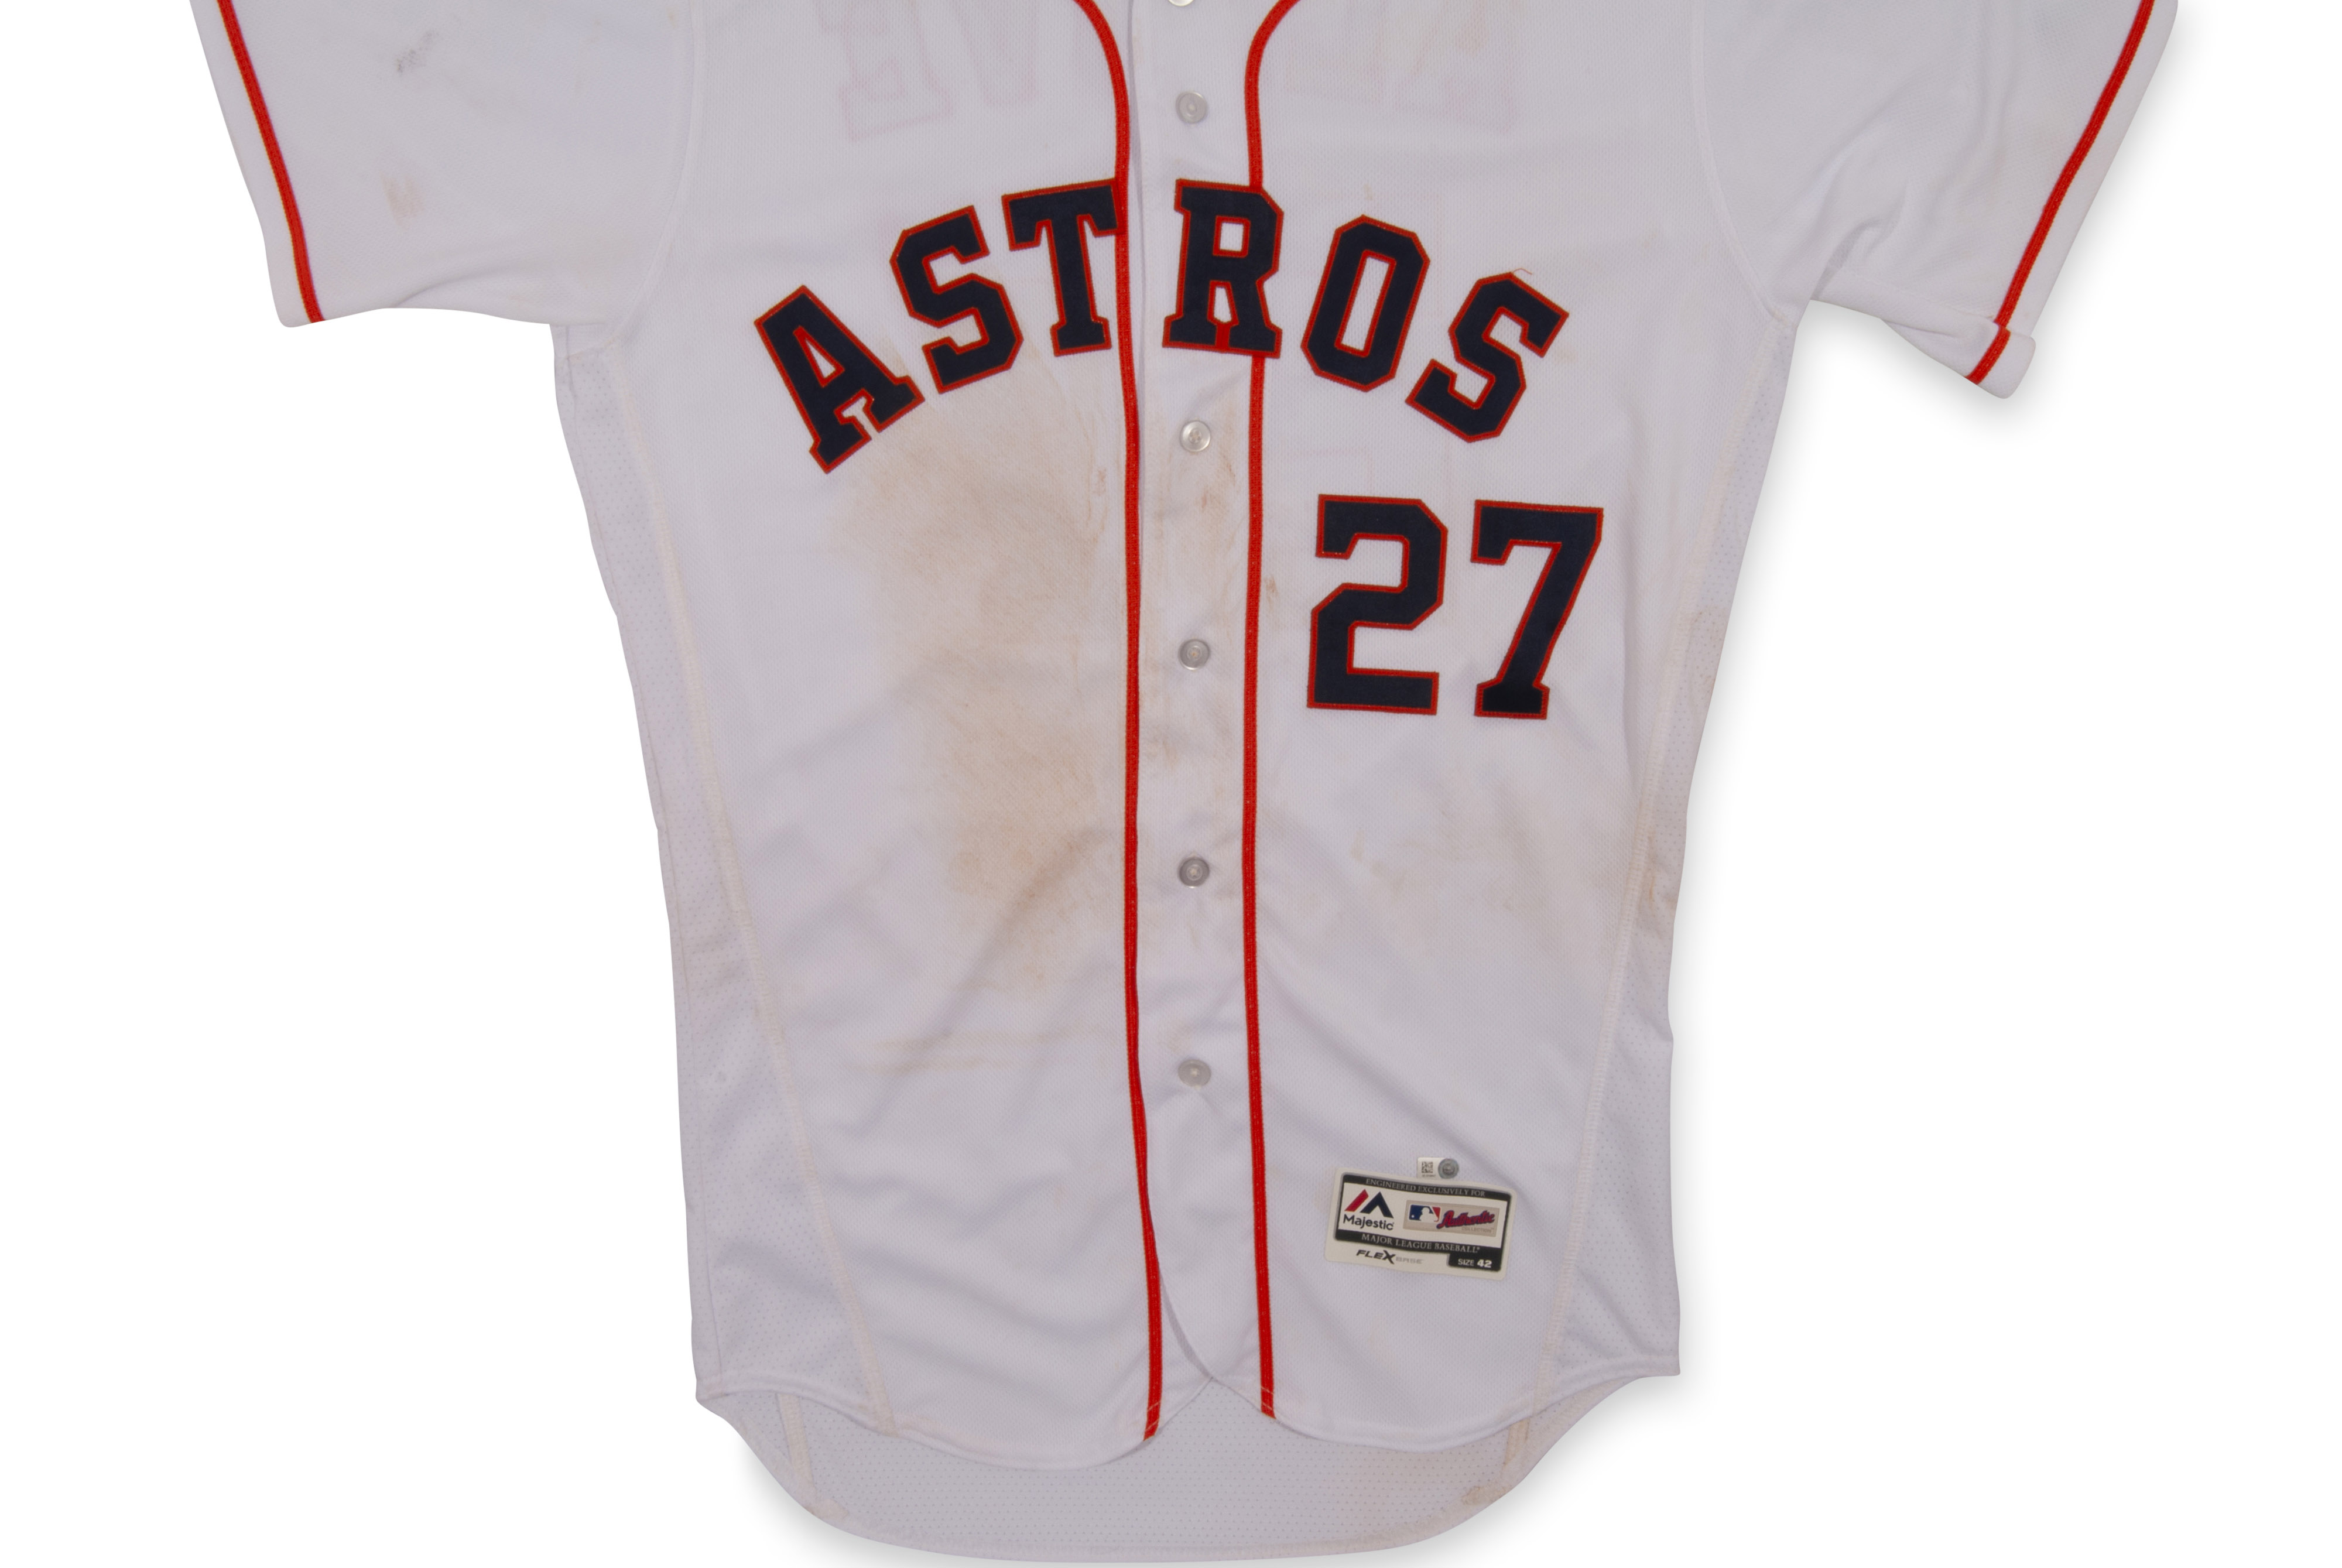 A detail view of the jersey worn by Jose Altuve of the Houston